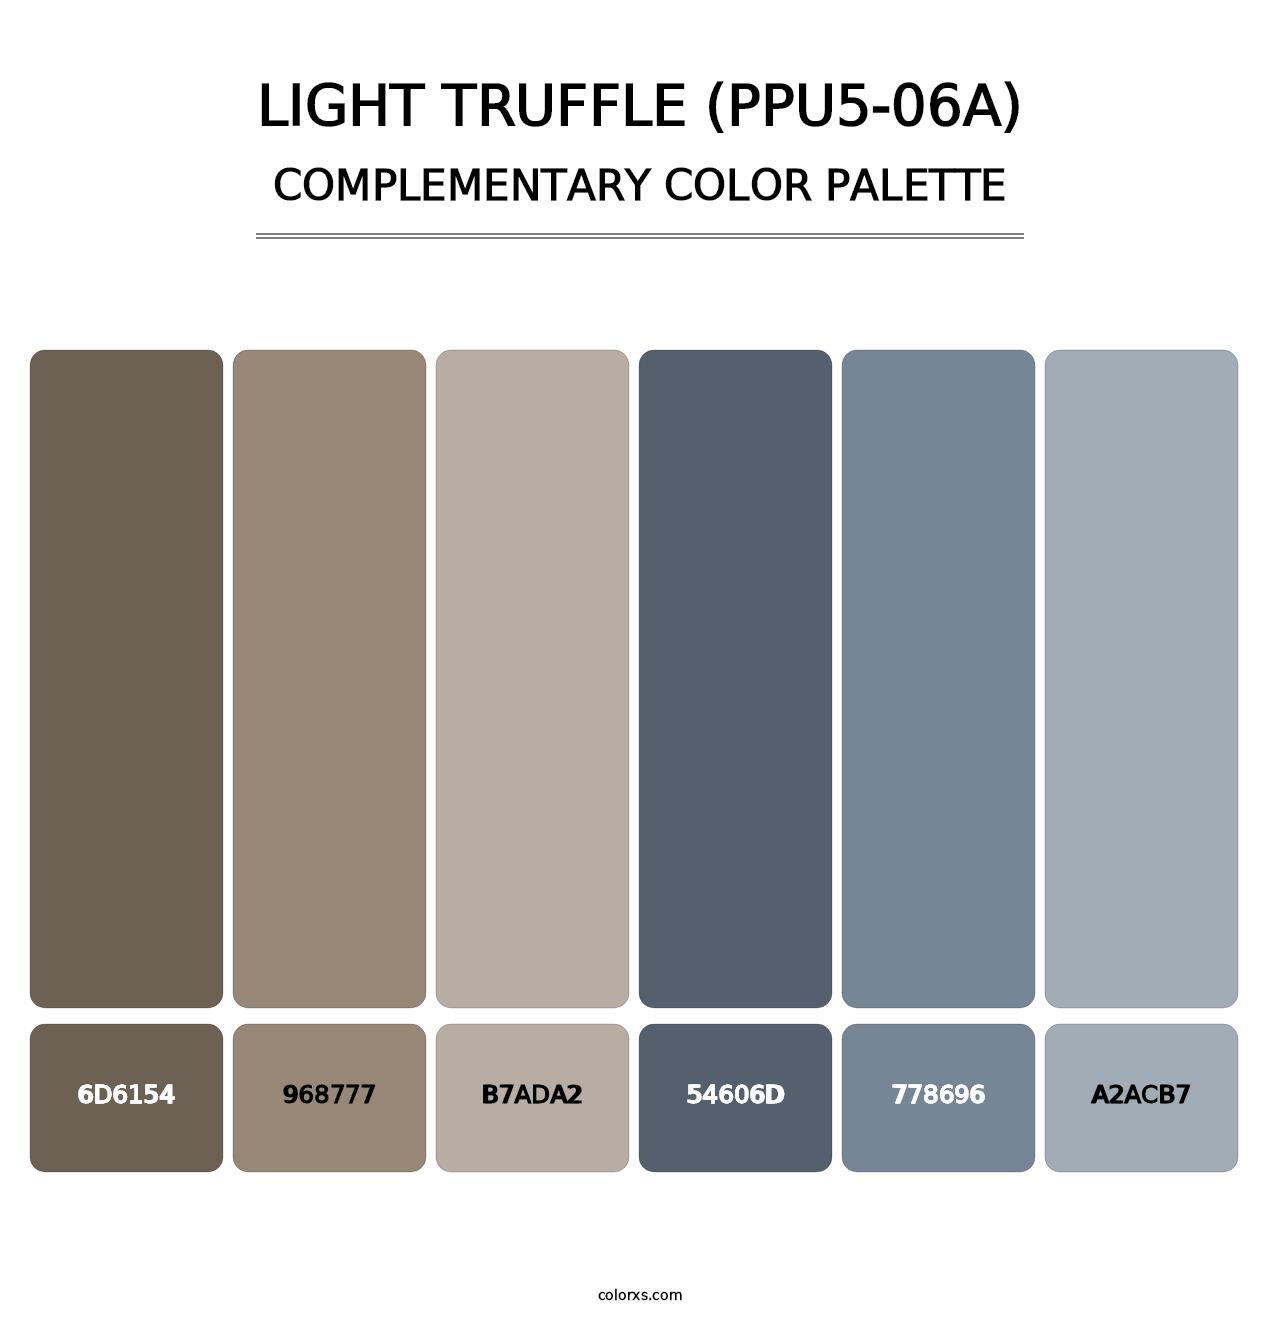 Light Truffle (PPU5-06A) - Complementary Color Palette